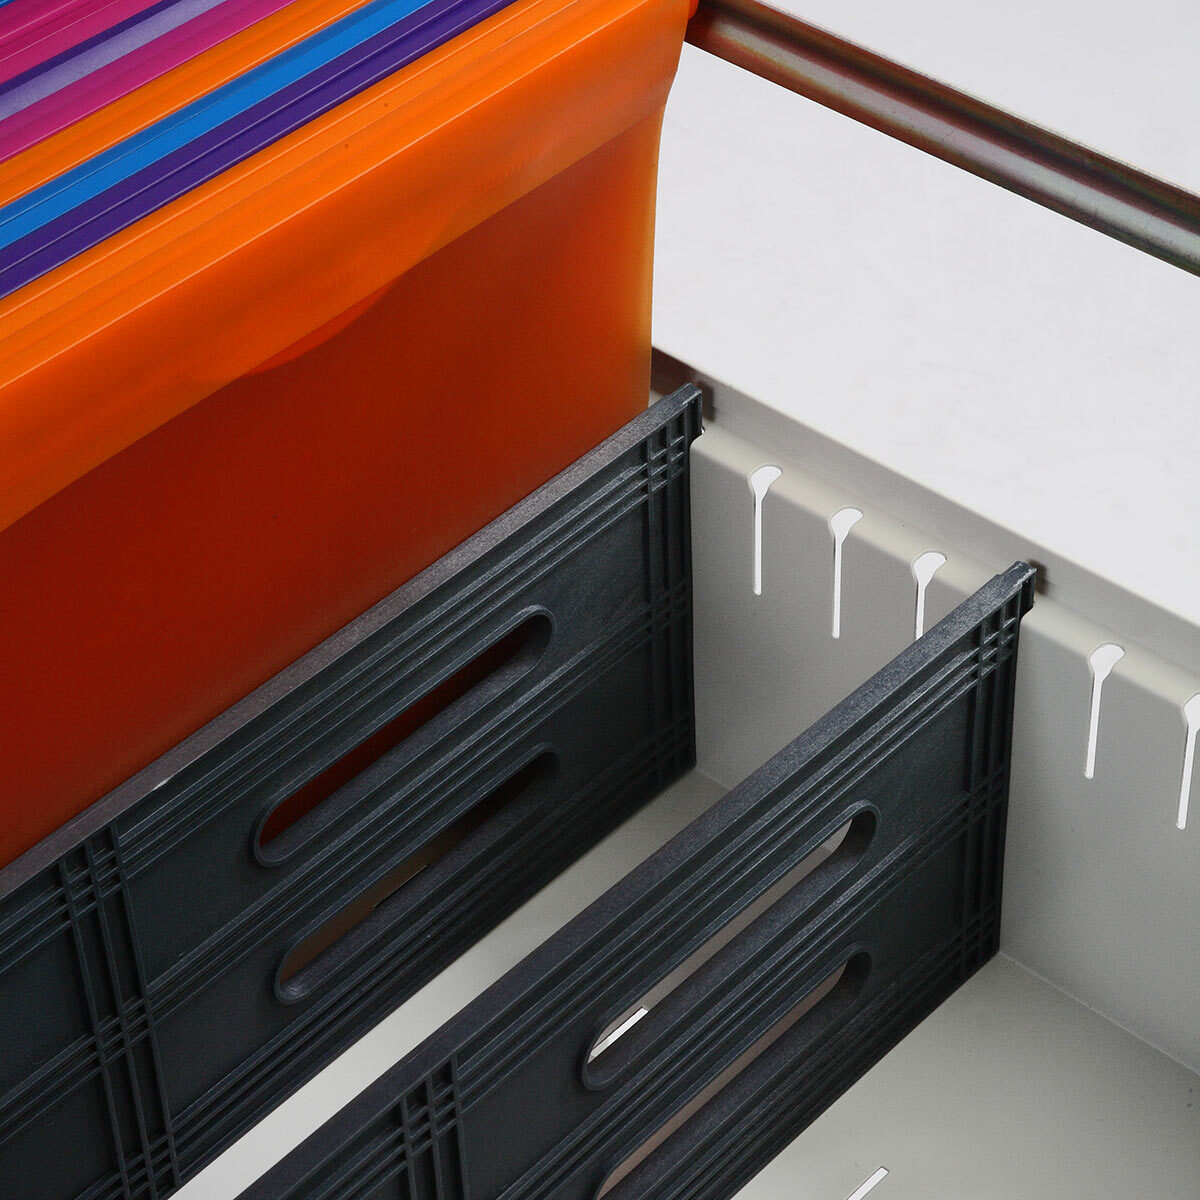 Close up image of open drawer